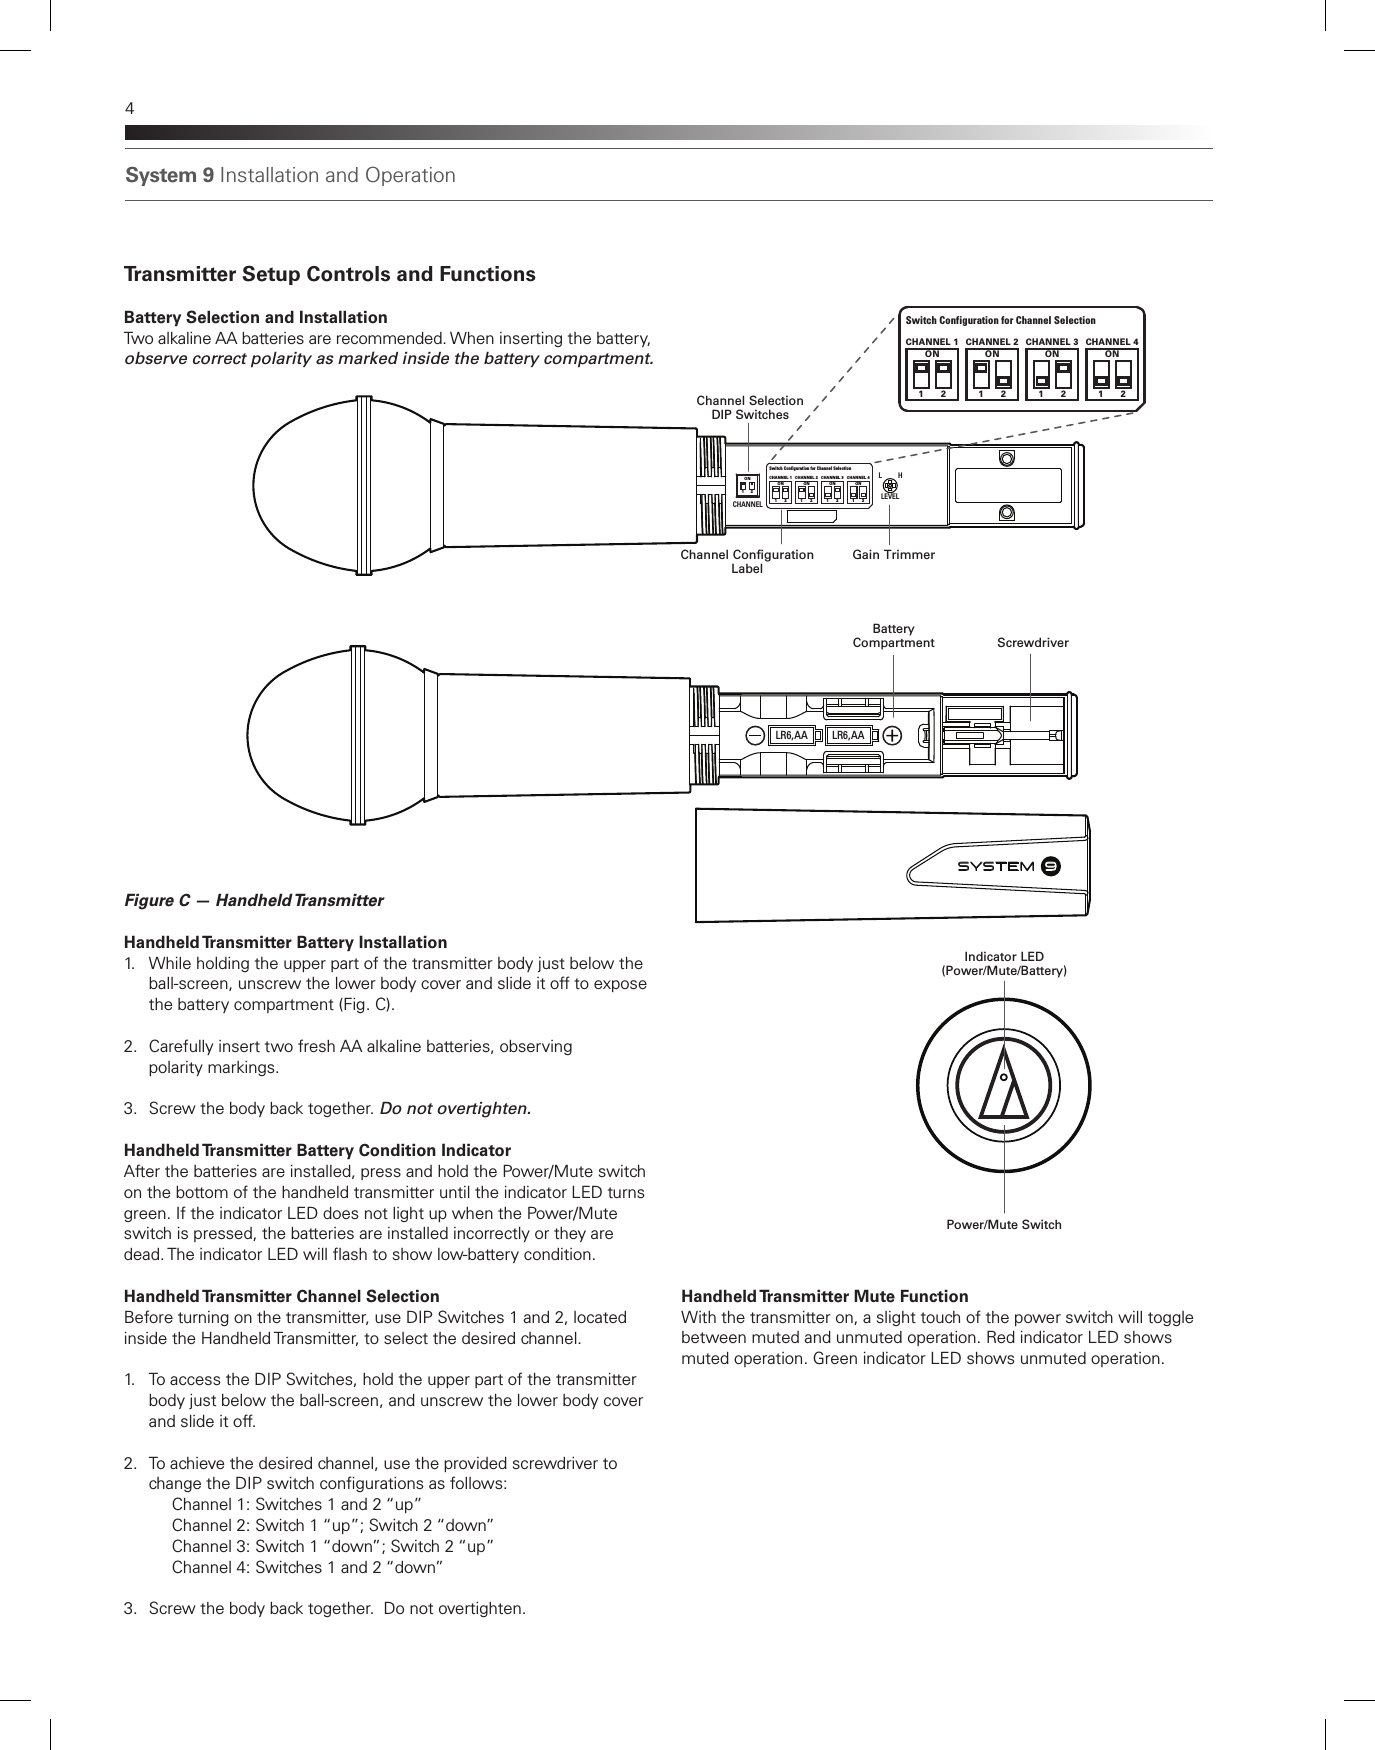 System 9 Installation and Operation4Transmitter Setup Controls and FunctionsBattery Selection and InstallationTwo alkaline AA batteries are recommended. When inserting the battery, observe correct polarity as marked inside the battery compartment. Figure C — Handheld Transmitter Handheld Transmitter Battery Installation1.  While holding the upper part of the transmitter body just below the    ball-screen, unscrew the lower body cover and slide it off to expose    the battery compartment (Fig. C).2.  Carefully insert two fresh AA alkaline batteries, observing    polarity markings.3.  Screw the body back together. Do not overtighten.  Handheld Transmitter Battery Condition IndicatorAfter the batteries are installed, press and hold the Power/Mute switch on the bottom of the handheld transmitter until the indicator LED turns green. If the indicator LED does not light up when the Power/Mute switch is pressed, the batteries are installed incorrectly or they are dead. The indicator LED will ash to show low-battery condition. Handheld Transmitter Channel SelectionBefore turning on the transmitter, use DIP Switches 1 and 2, located inside the Handheld Transmitter, to select the desired channel. 1.  To access the DIP Switches, hold the upper part of the transmitter    body just below the ball-screen, and unscrew the lower body cover    and slide it off.2.  To achieve the desired channel, use the provided screwdriver to    change the DIP switch congurations as follows:    Channel 1: Switches 1 and 2 “up”      Channel 2: Switch 1 “up”; Switch 2 “down”      Channel 3: Switch 1 “down”; Switch 2 “up”       Channel 4: Switches 1 and 2 “down” 3.  Screw the body back together.  Do not overtighten.LR6,AA LR6,AASYSTEM  9LEVELCHANNELL H1ON21ON2CHANNEL 1 CHANNEL 2 CHANNEL 3 CHANNEL 41ON2 1ON2 1ON2Switch Conf iguration for Channel Selection     Gain TrimmerChannel SelectionDIP SwitchesChannel ConfigurationLabelScrewdriverIndicator LED(Power/Mute/Battery)Power/Mute SwitchBattery CompartmentHandheld Transmitter Mute FunctionWith the transmitter on, a slight touch of the power switch will toggle between muted and unmuted operation. Red indicator LED shows muted operation. Green indicator LED shows unmuted operation.1ON2CHANNEL 1 CHANNEL 2 CHANNEL 3 CHANNEL 41ON2 1ON2 1ON2Switch Conf iguration for Channel Selection     